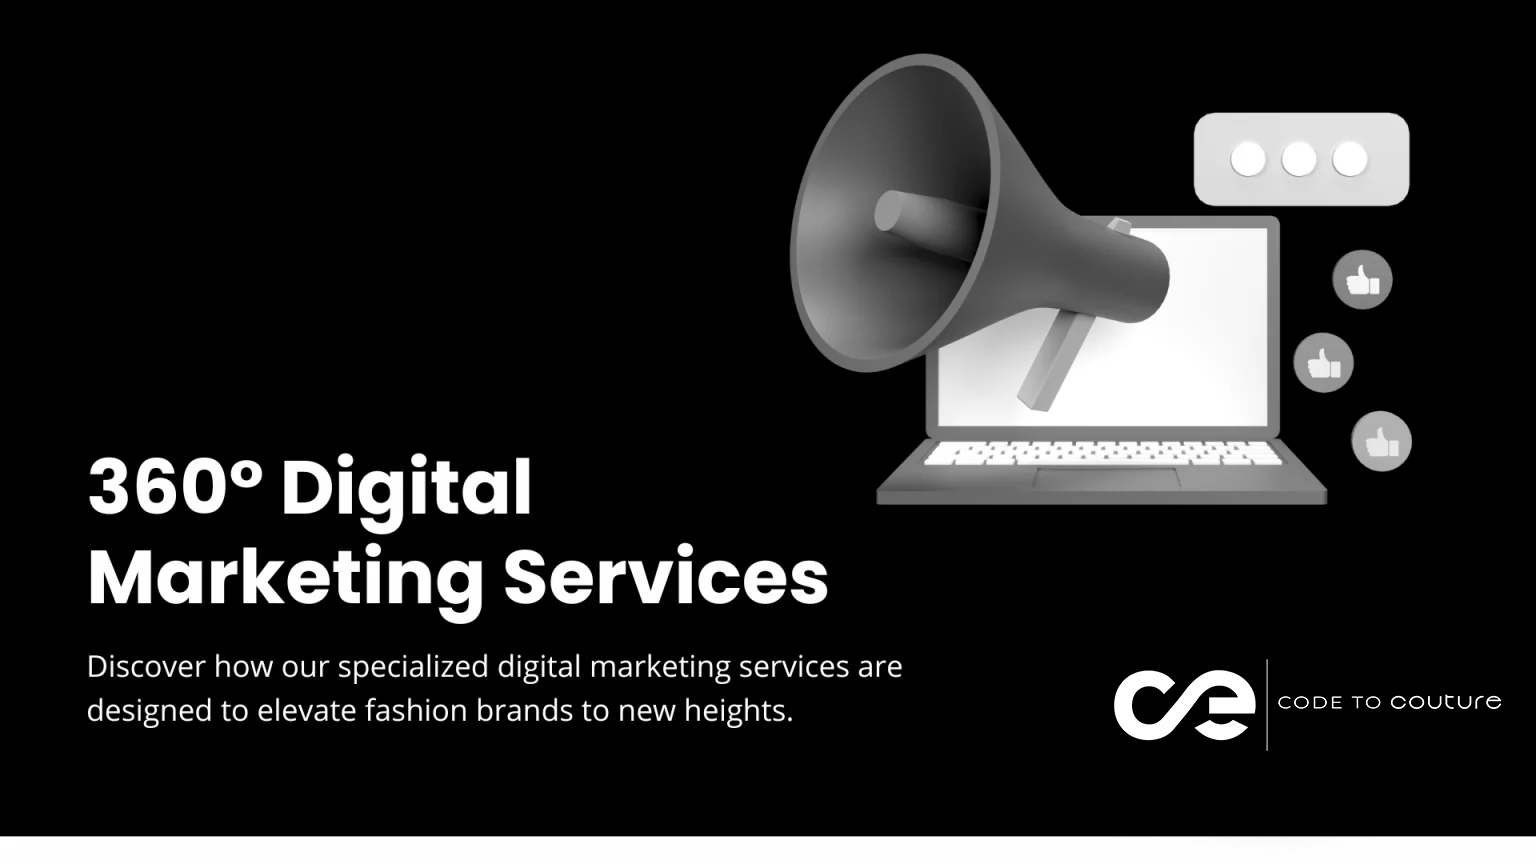 Everything About Our 360 Digital Marketing Services